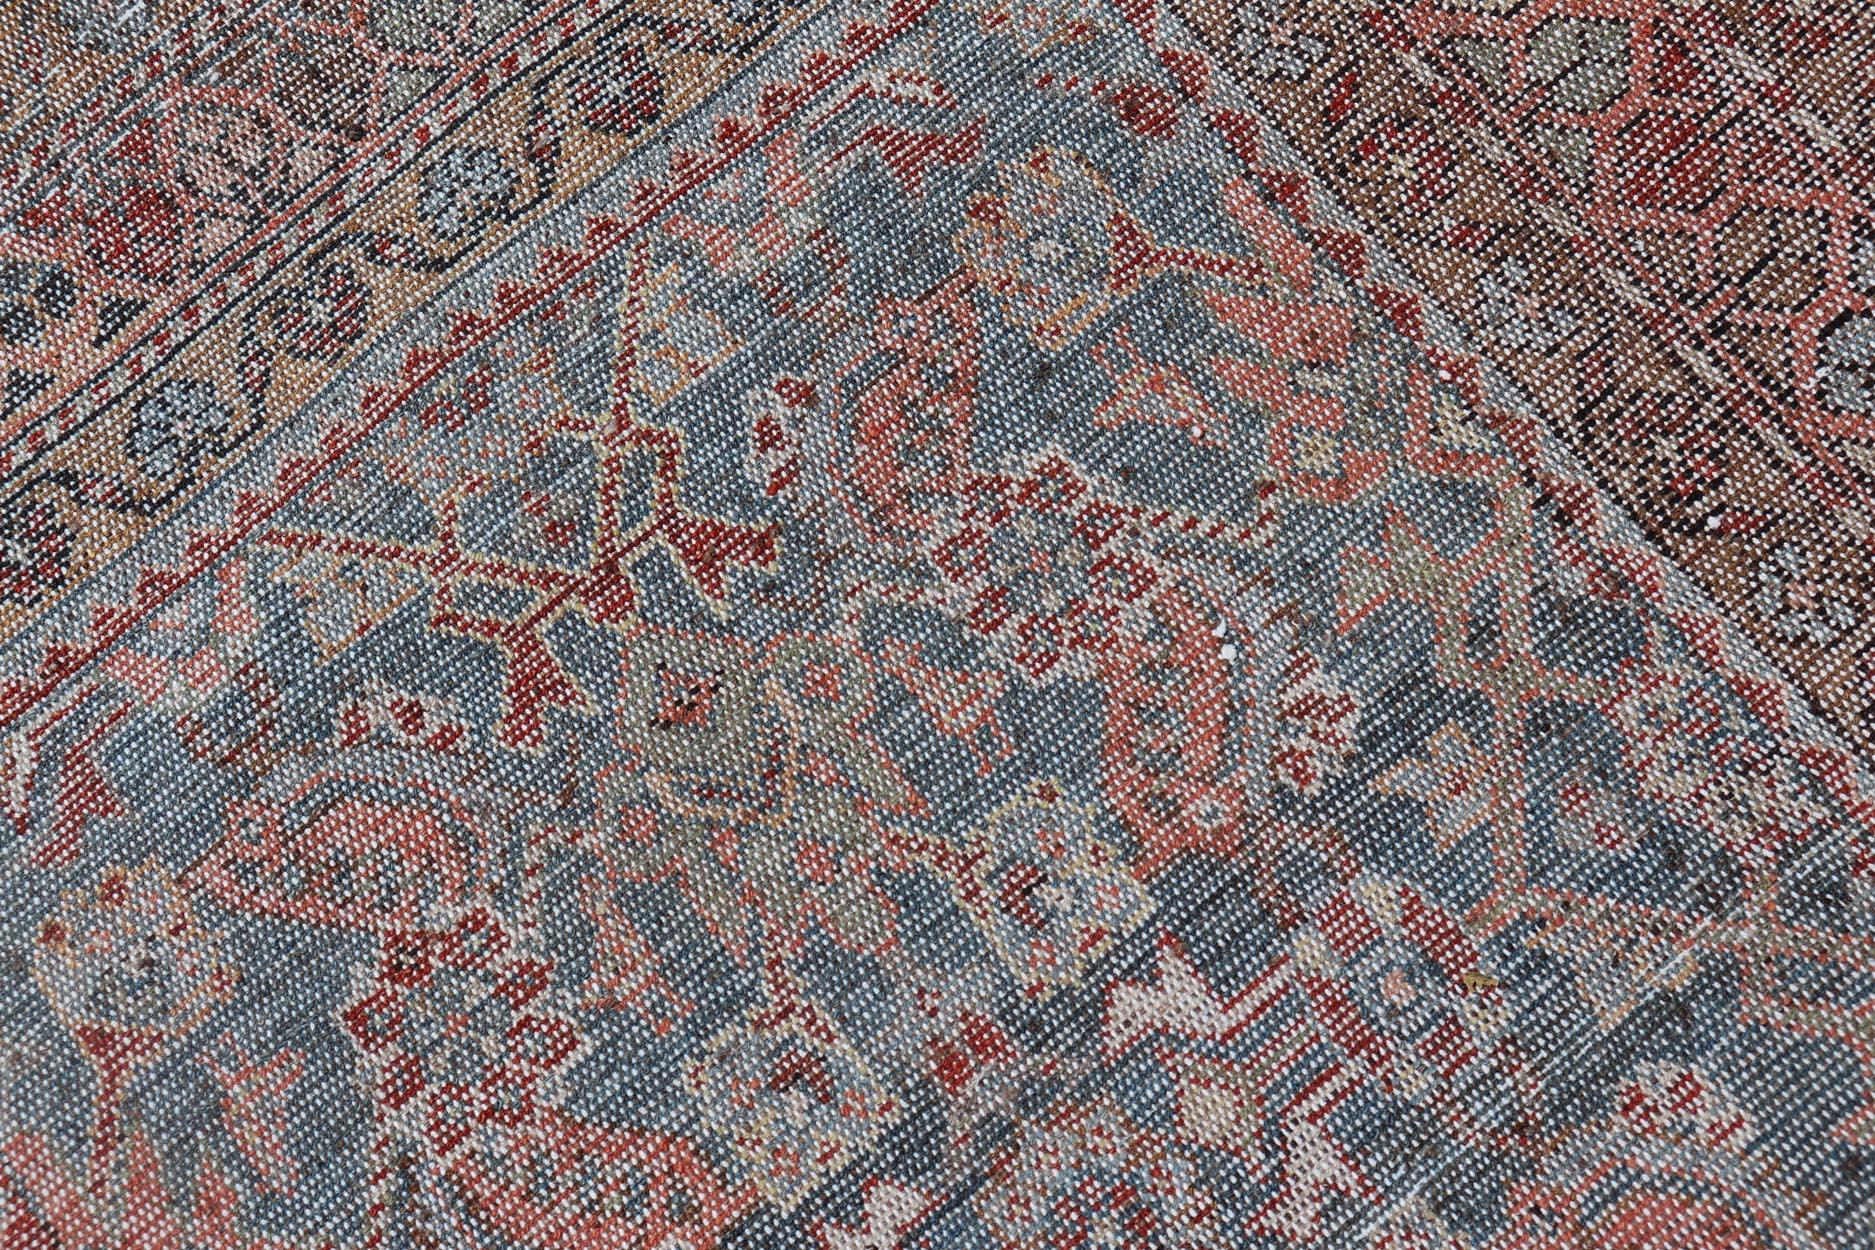 N.W. Persian Antique Runner with Geometric Florals Set on a Blue Field For Sale 6